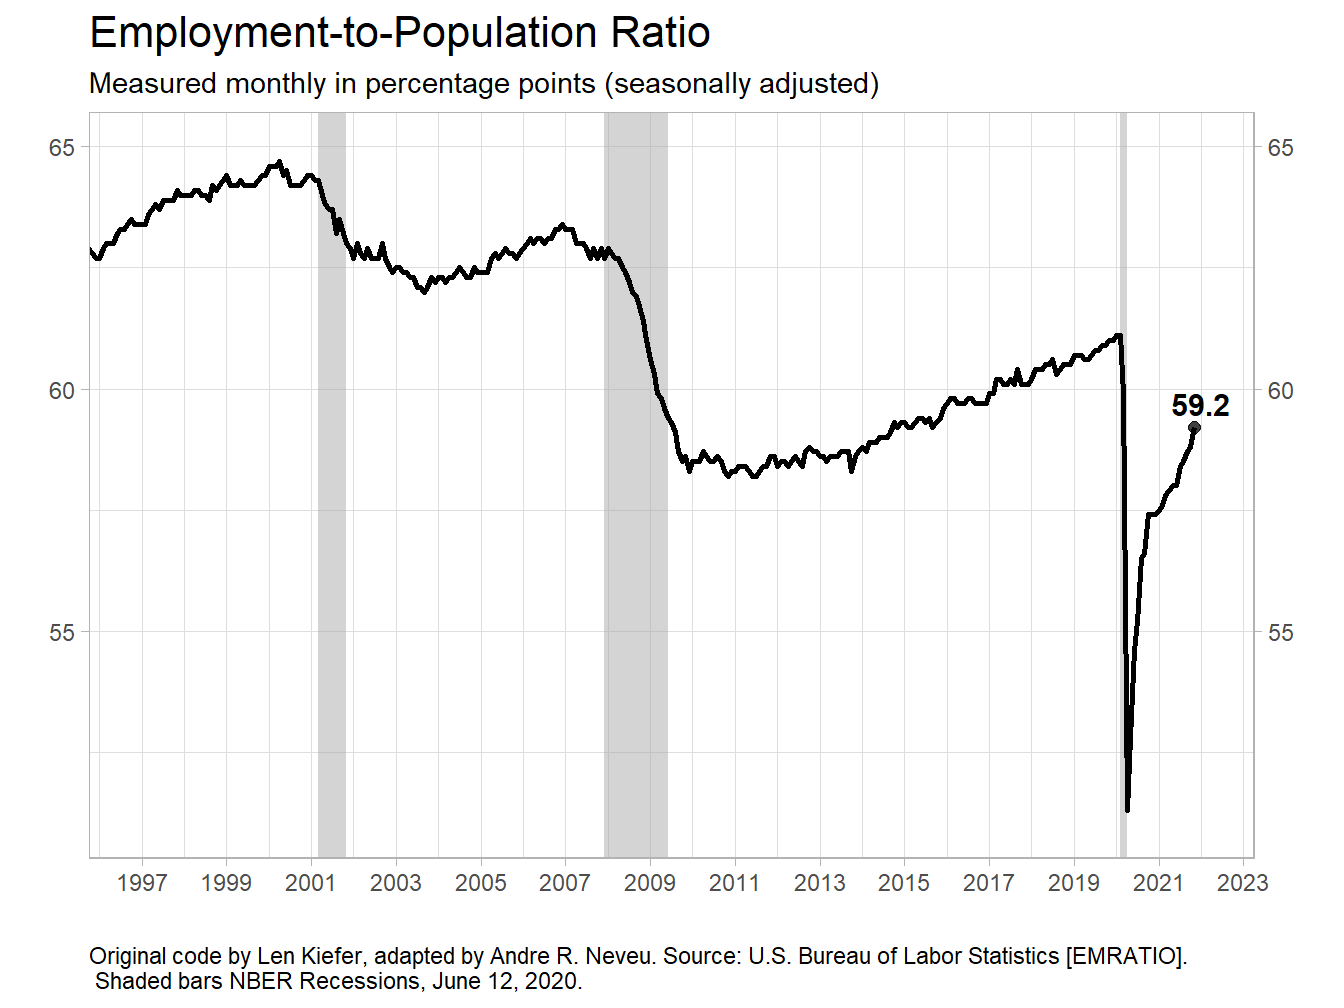 Expectedly, the Percentage of All People Employed Has Fallen